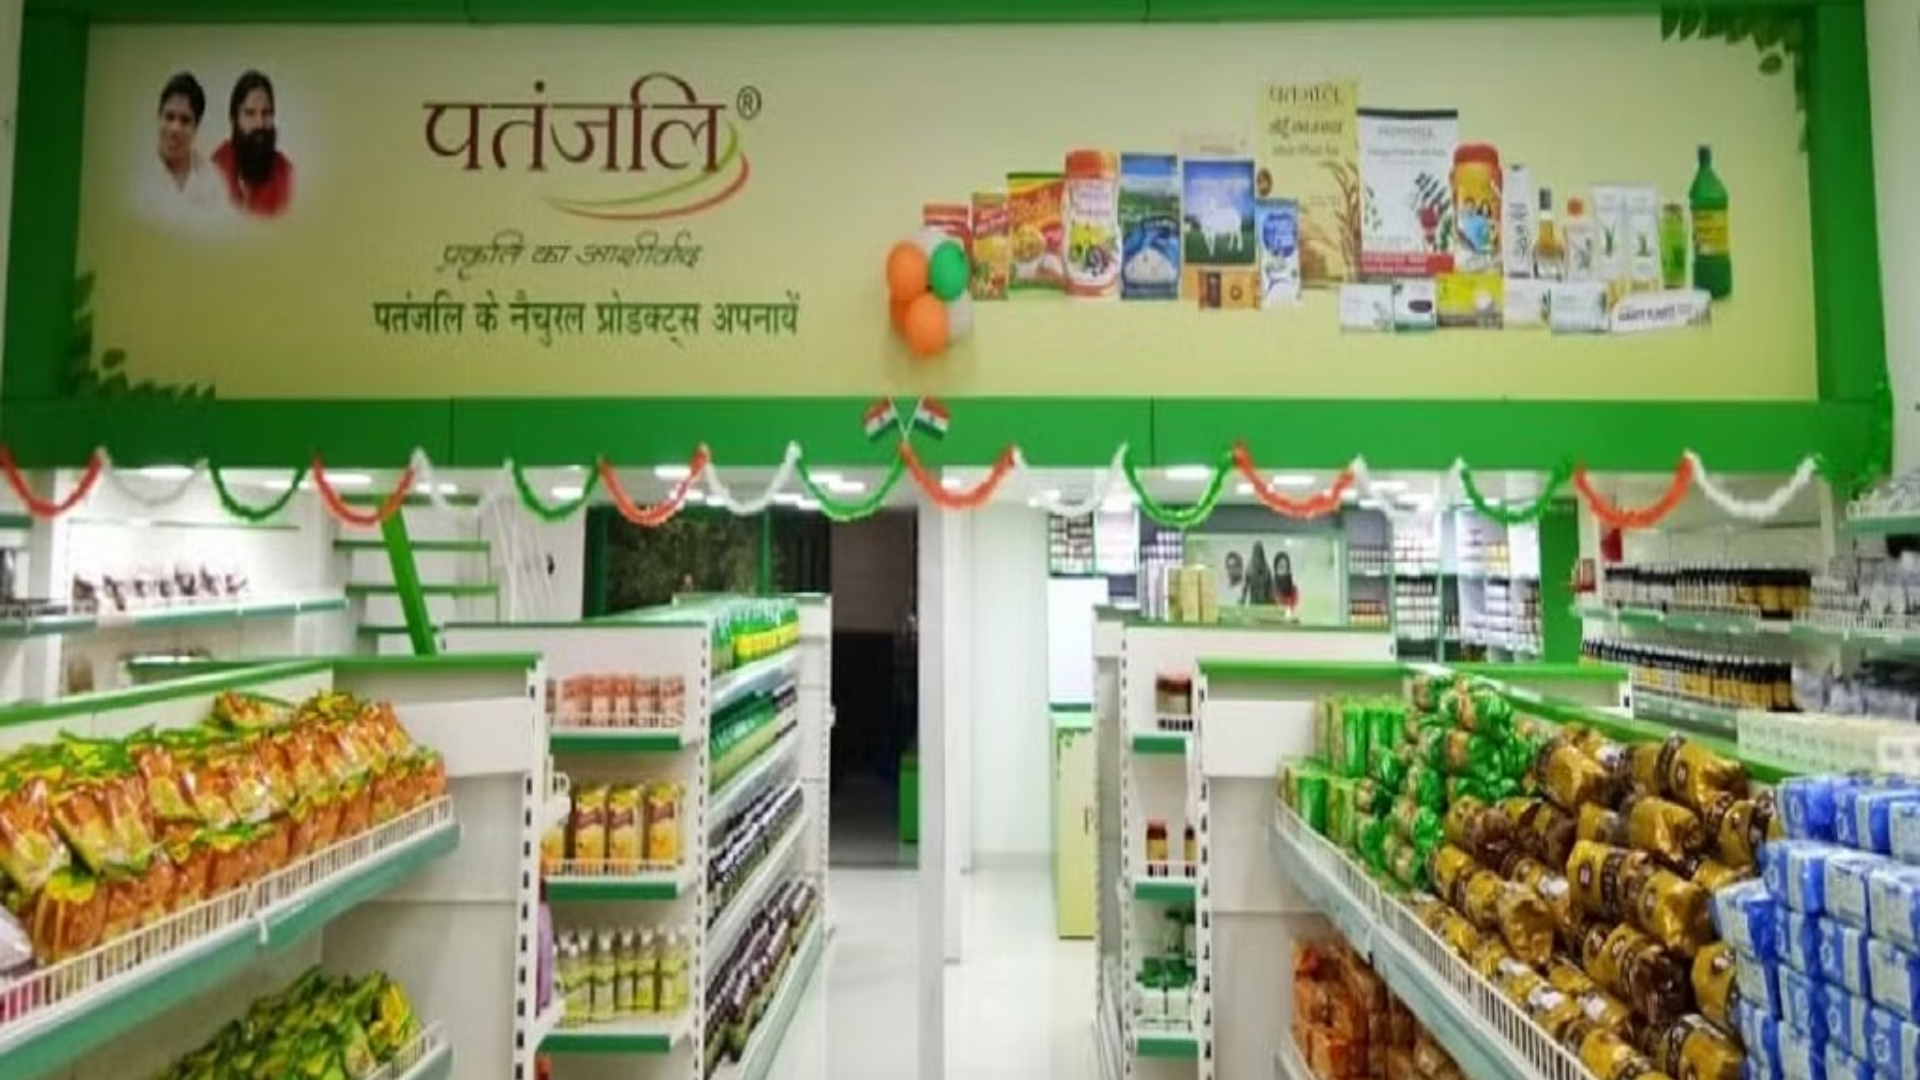 Patanjali’s Apology To Supreme Court Over Ads Links To Call For Modernizing “Archaic” Law